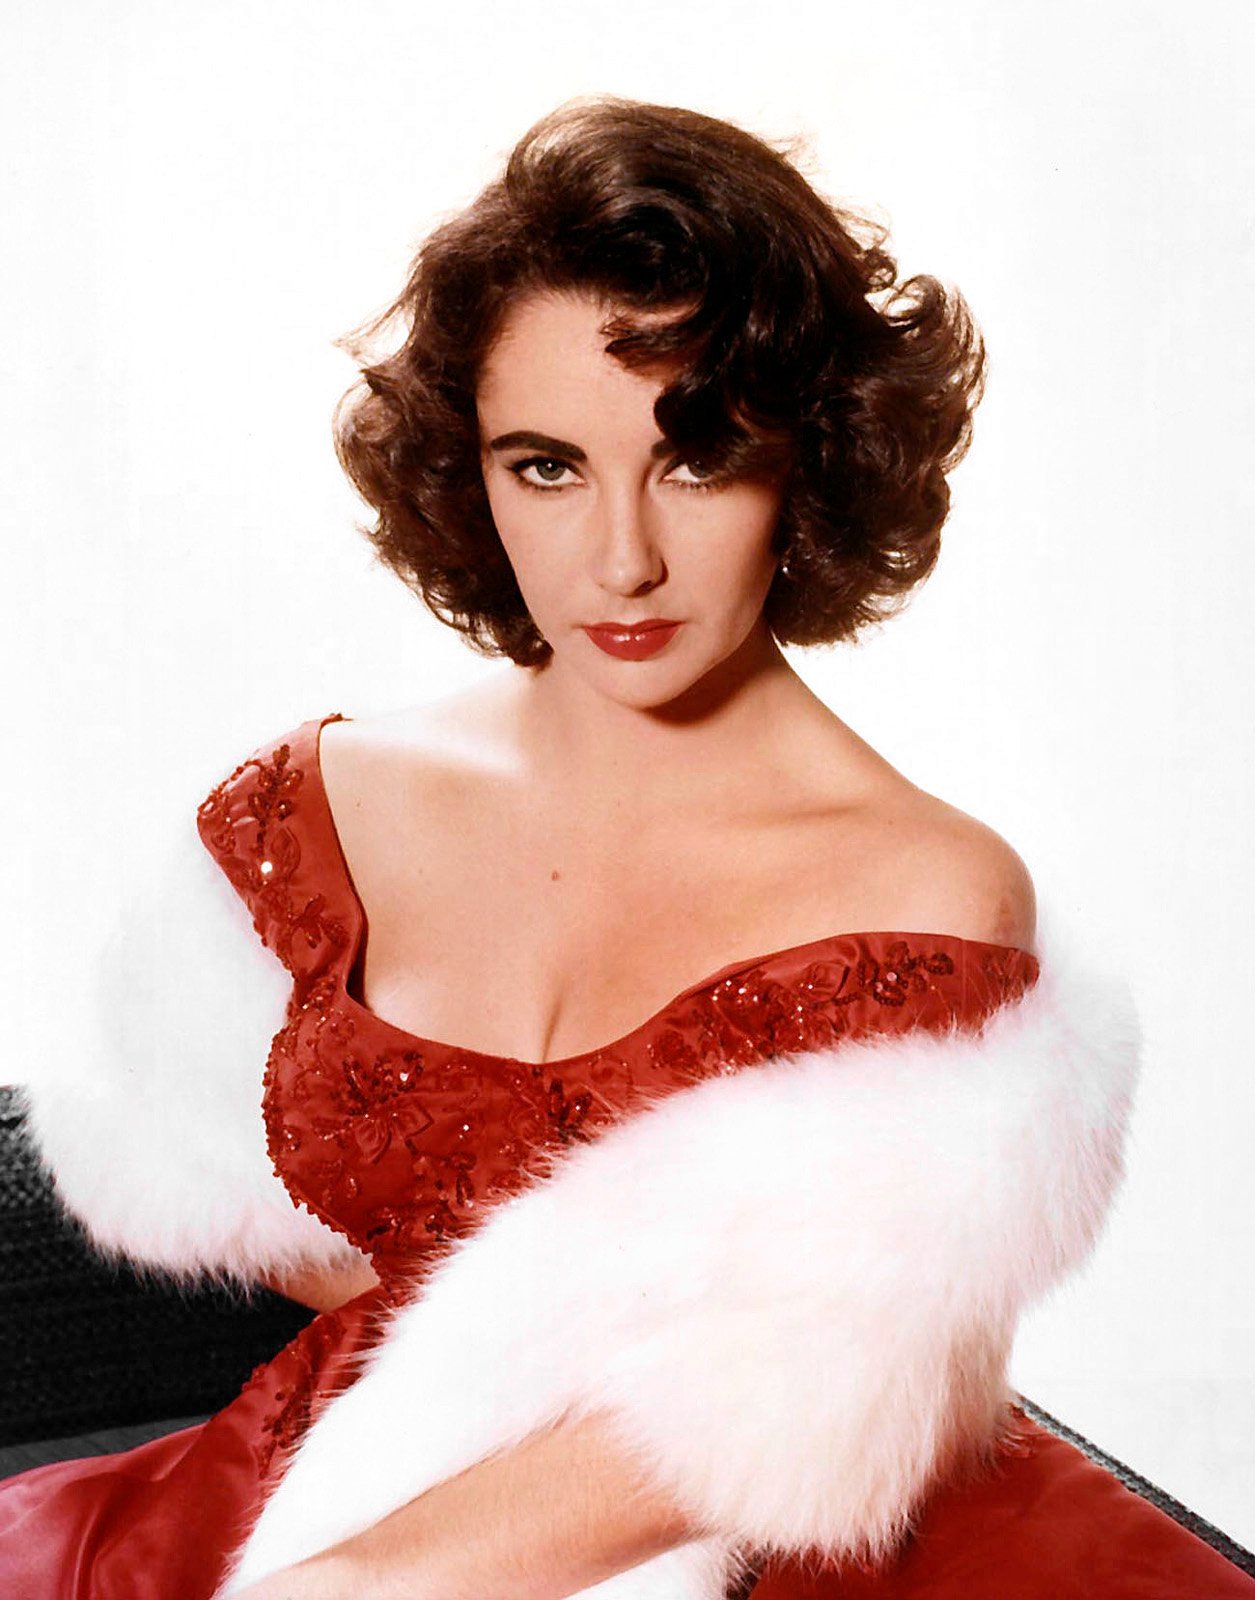 A publicity photo of Elizabeth Taylor circa 1955. | Source : Wikimedia Commons